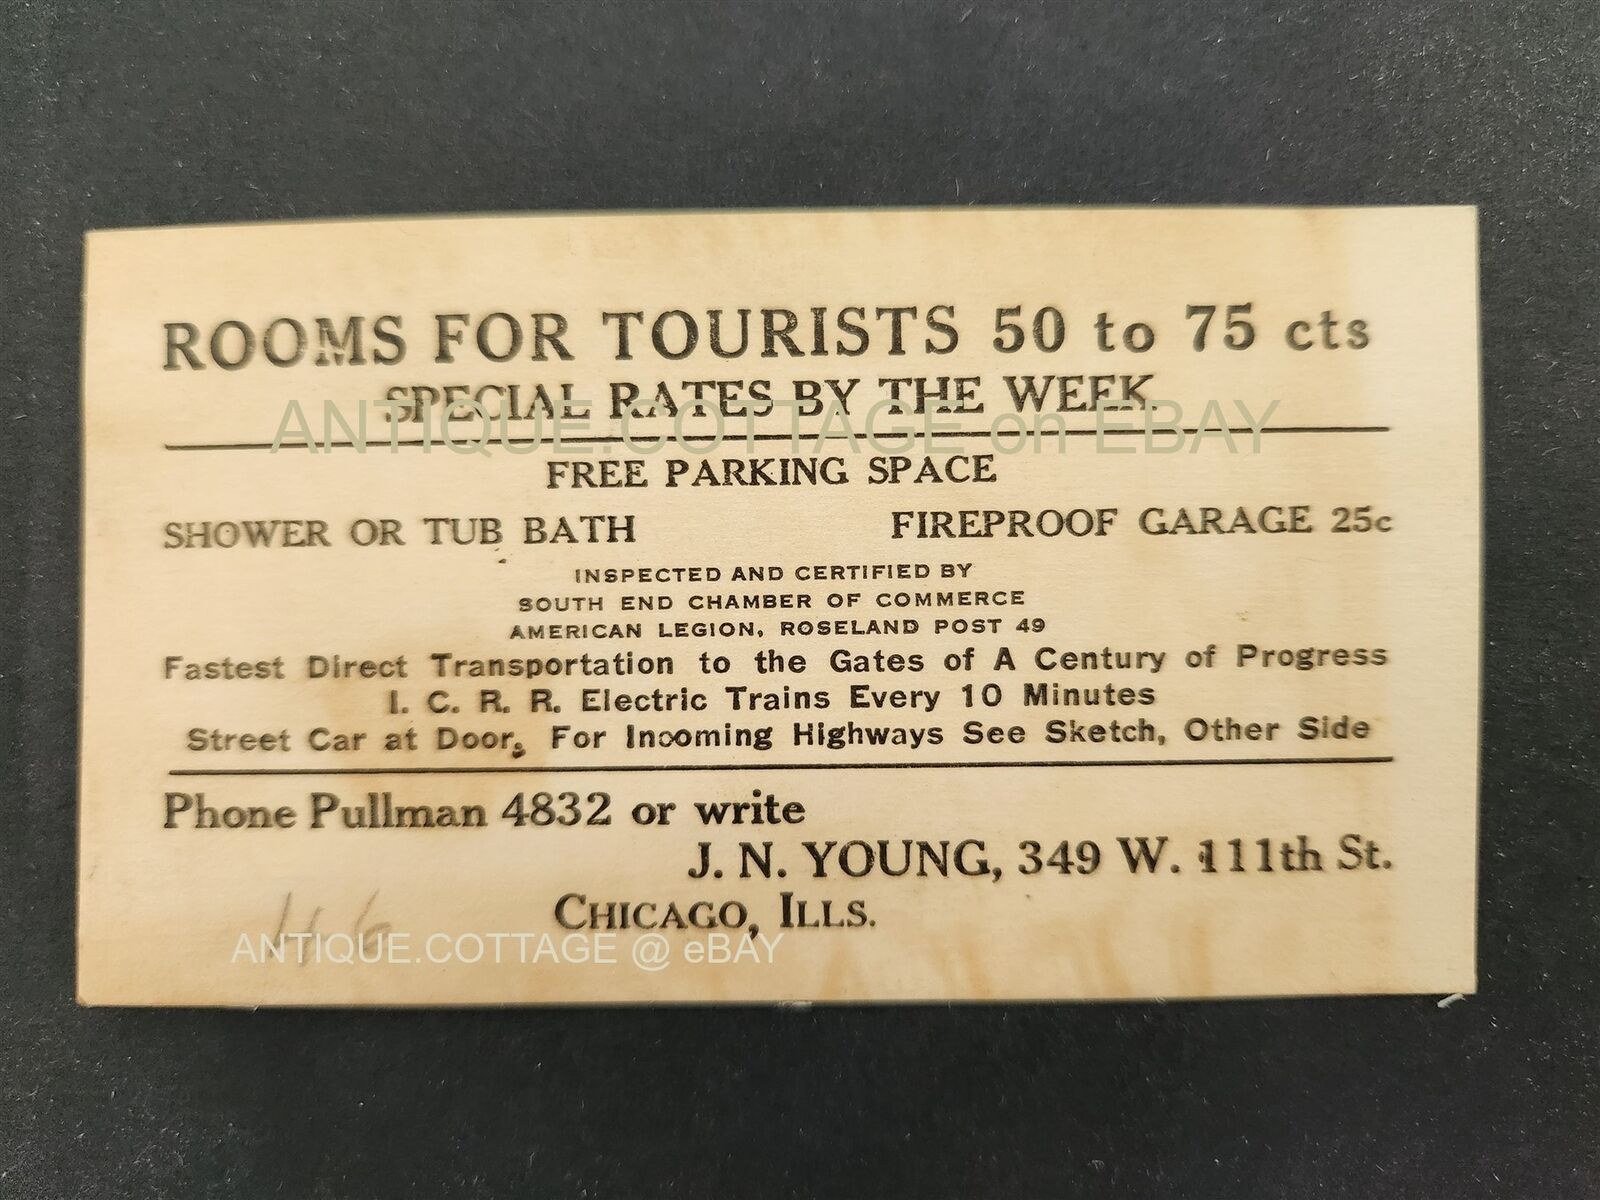 antique ROOMS for TOURISTS 50-75cts chicago il J N YOUNG at 349 W 111th Street 